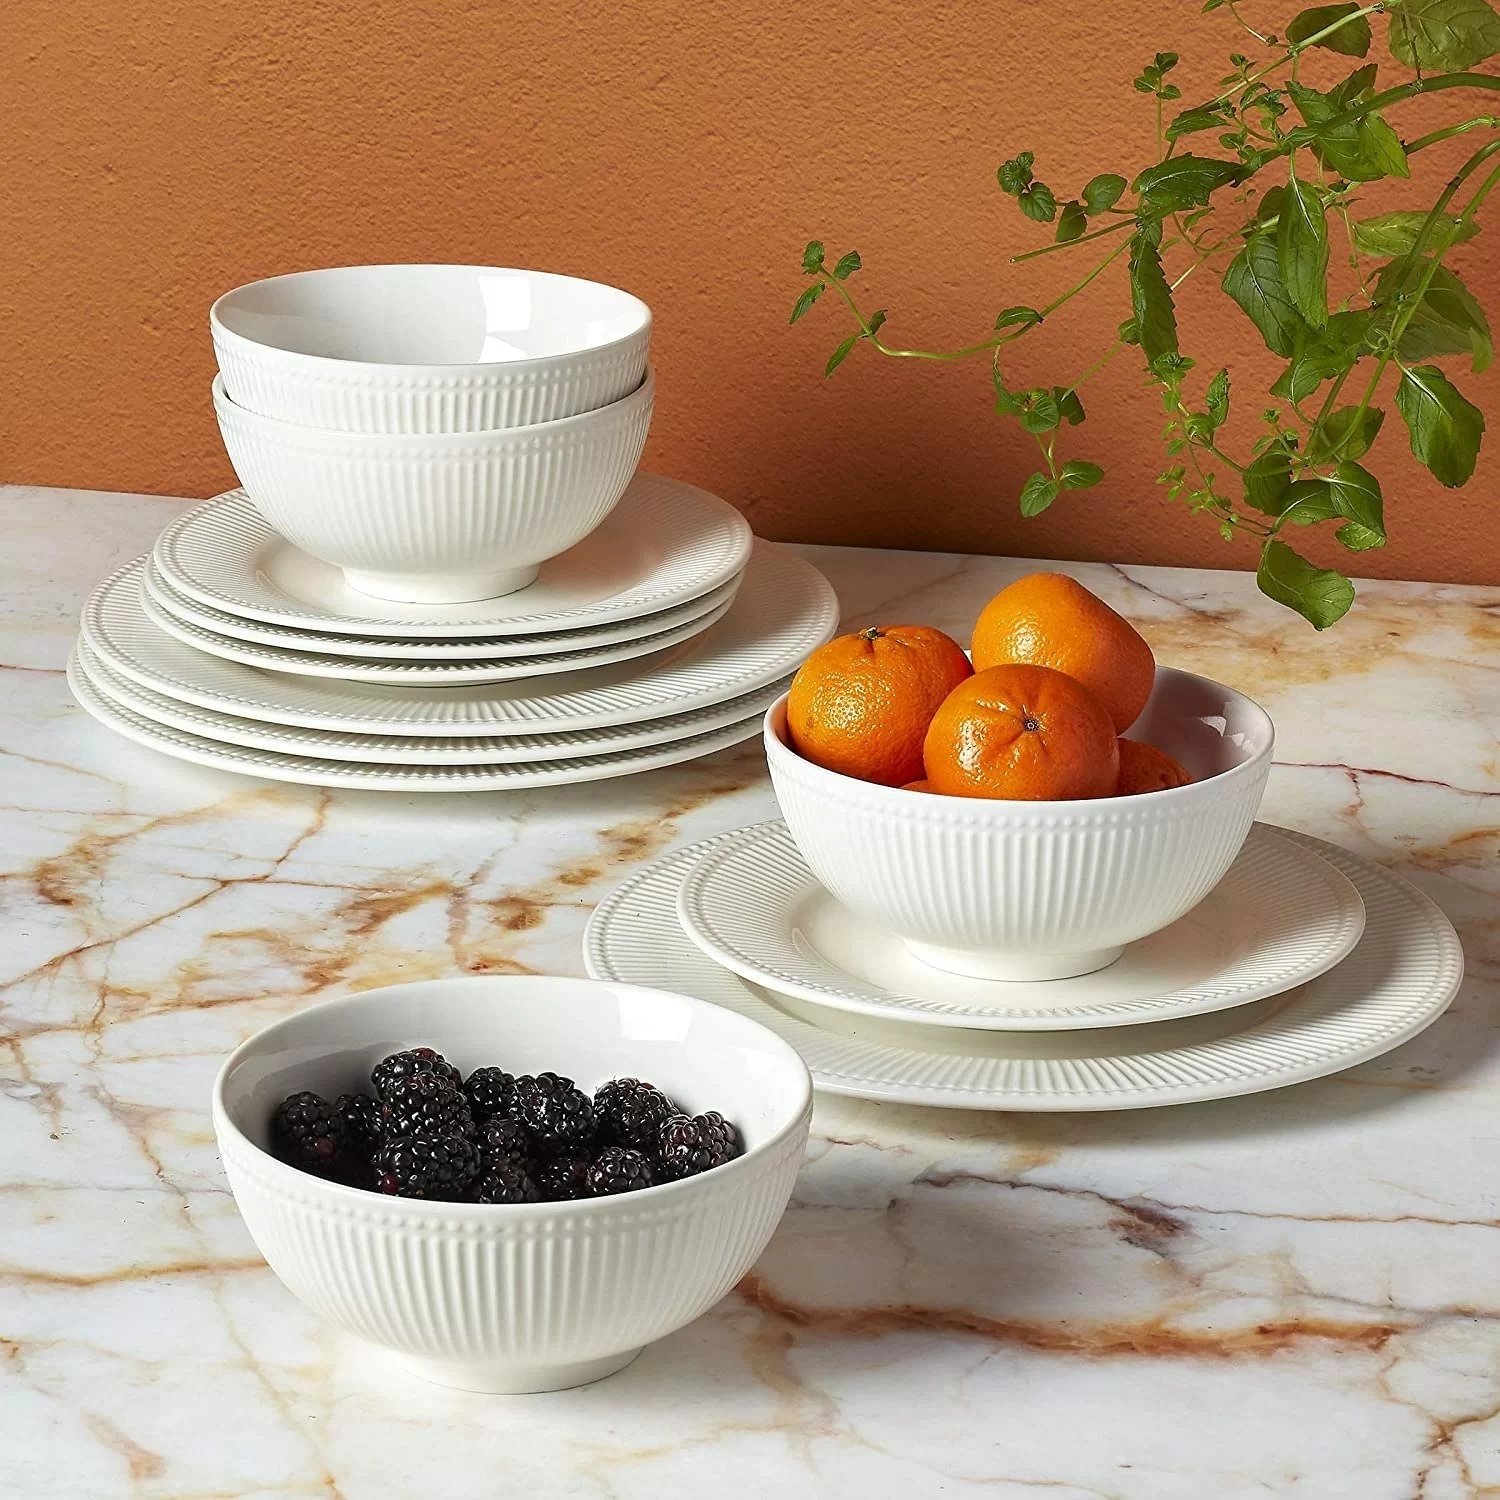 The embossed dishes in a off-white color